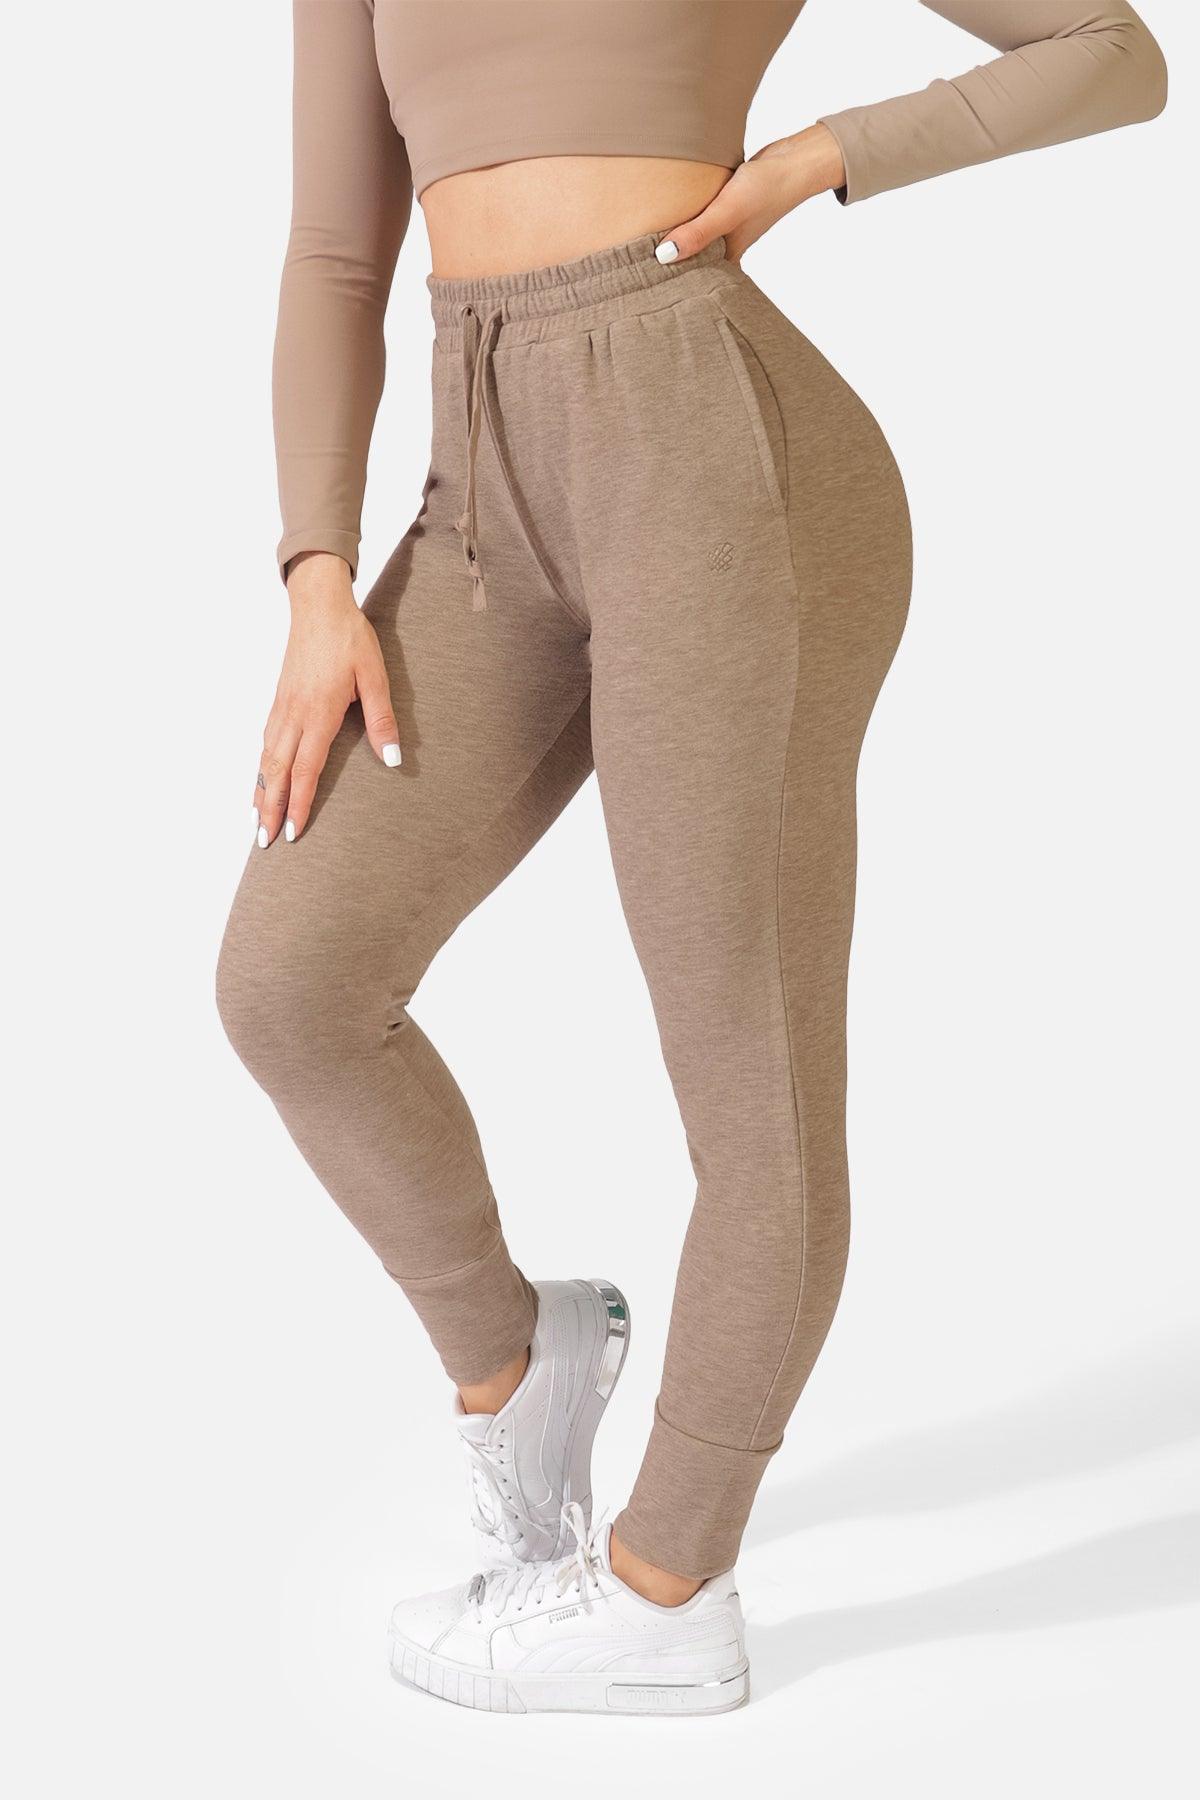 Lacey Pocket Leggings - Black – Jed North Canada